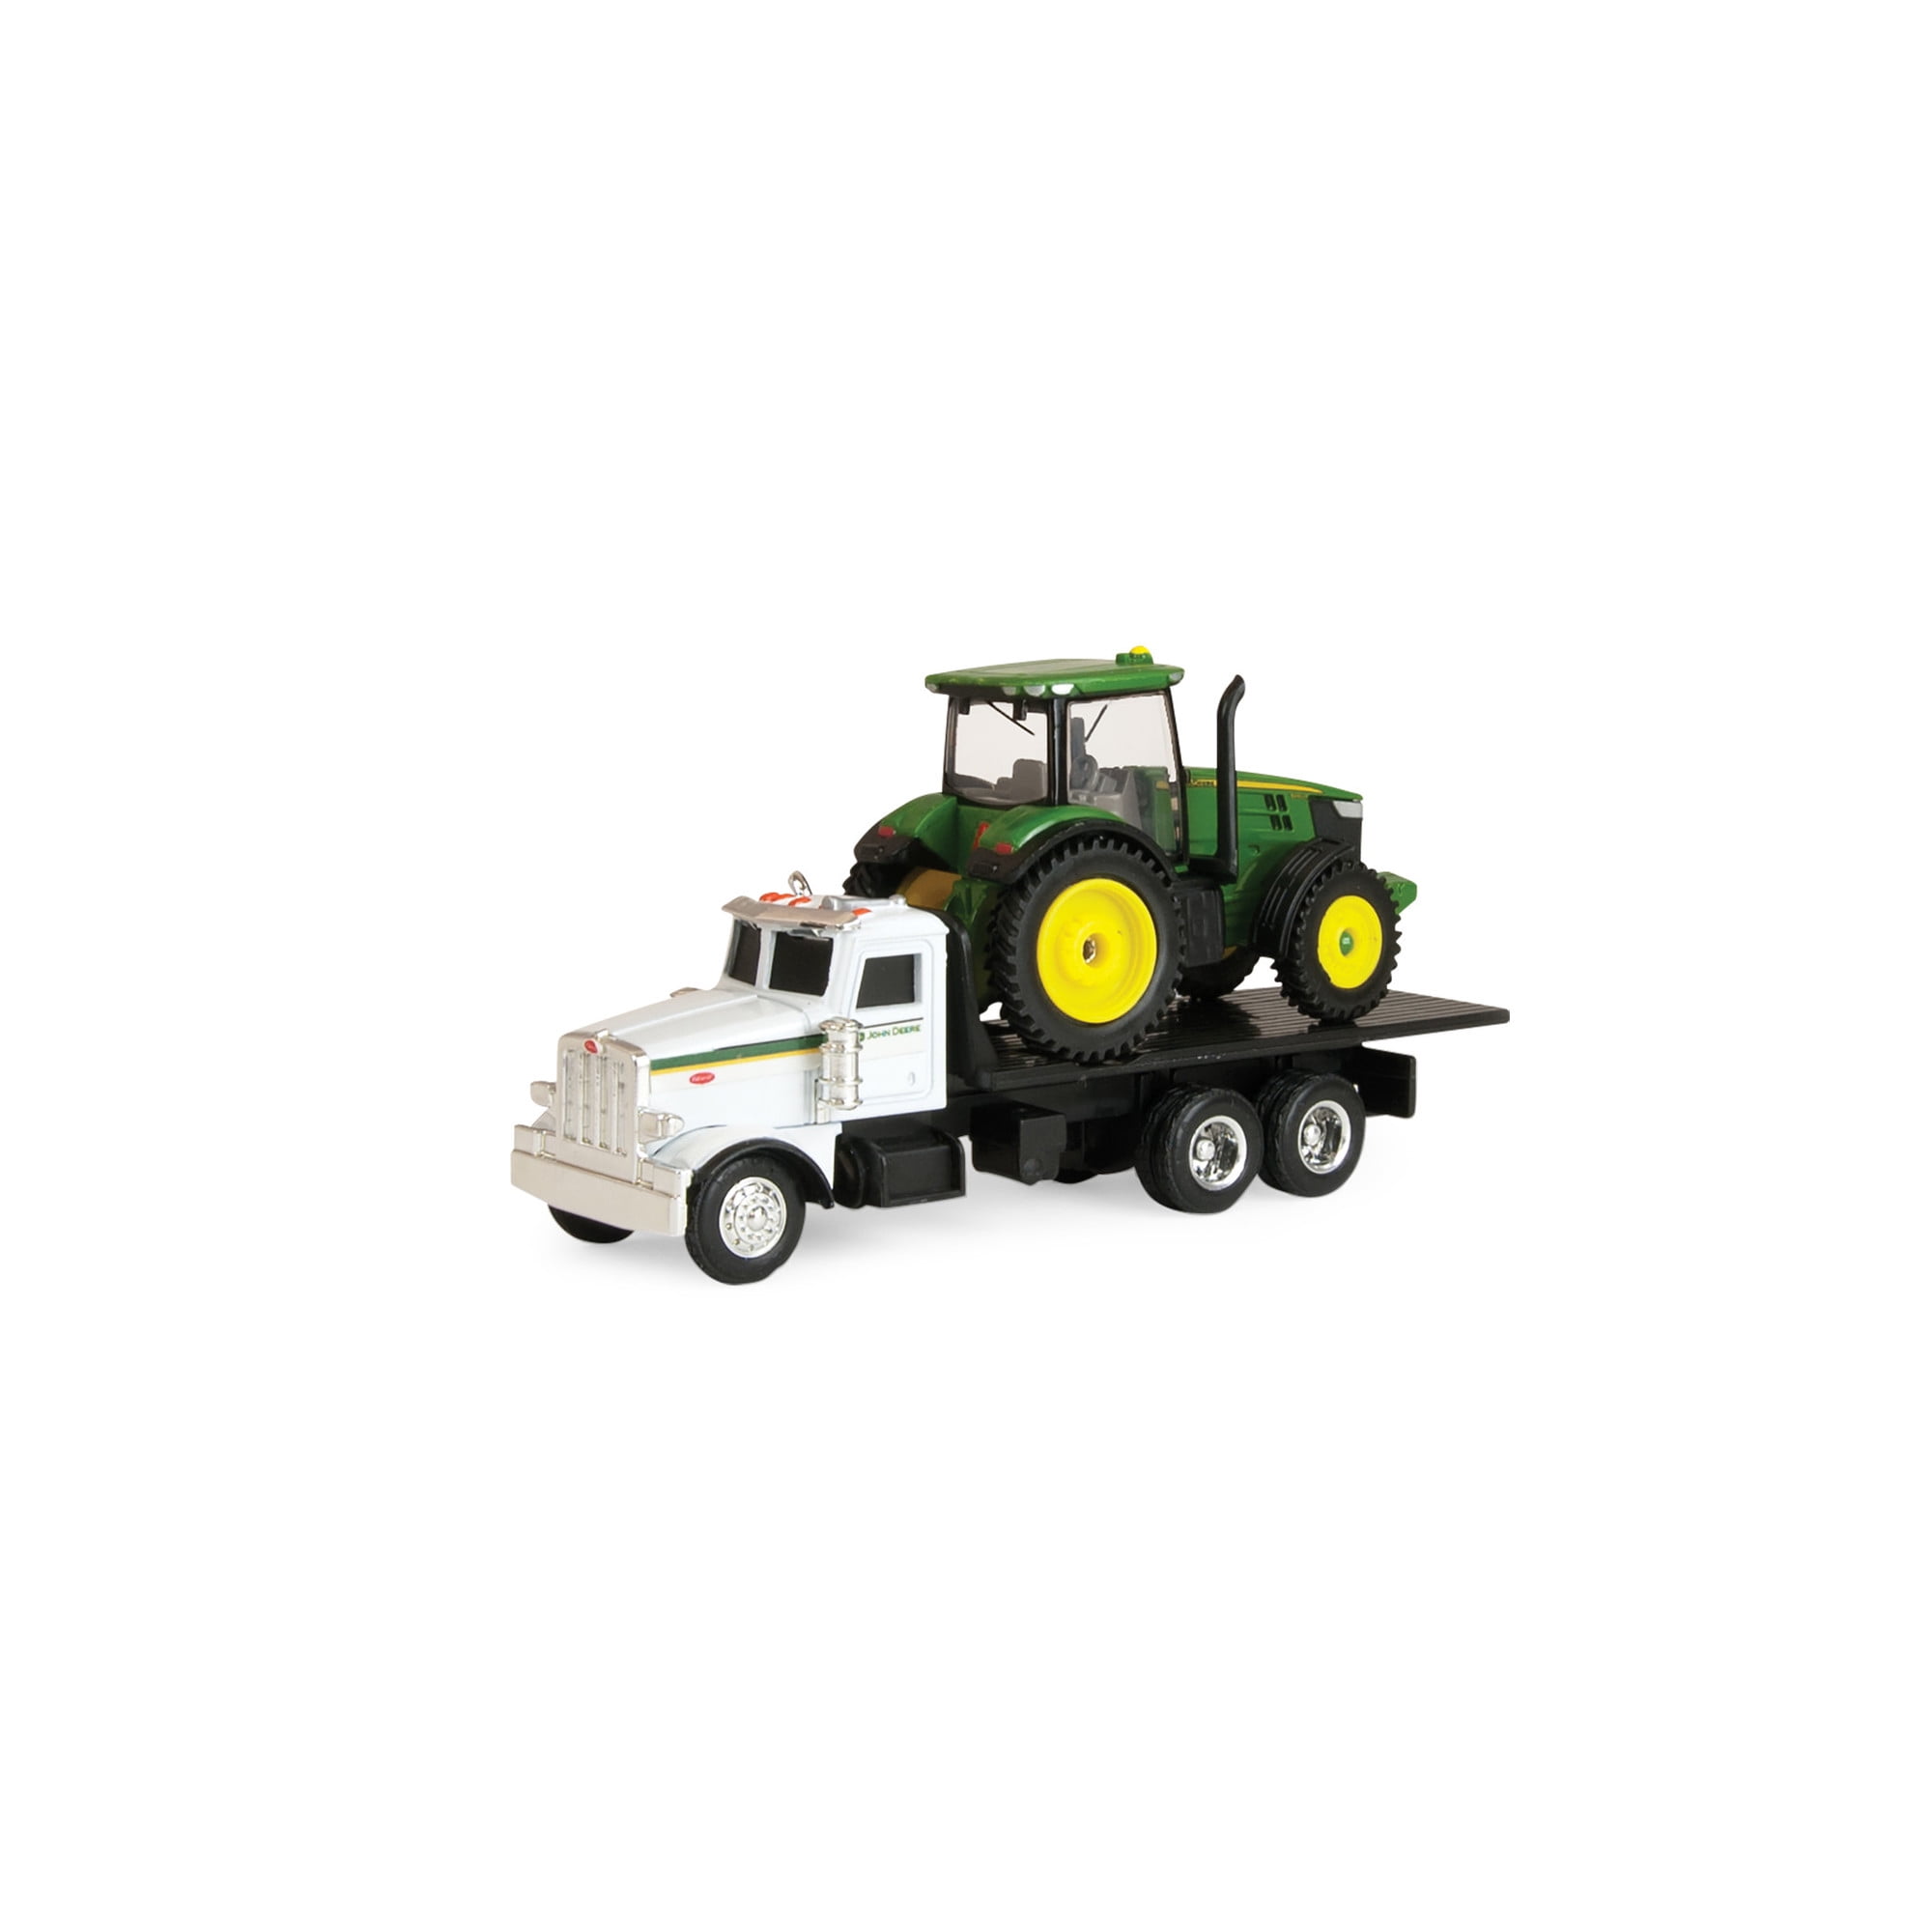 Ertl Collectibles Dealer Truck With 7r Tractor for sale online 